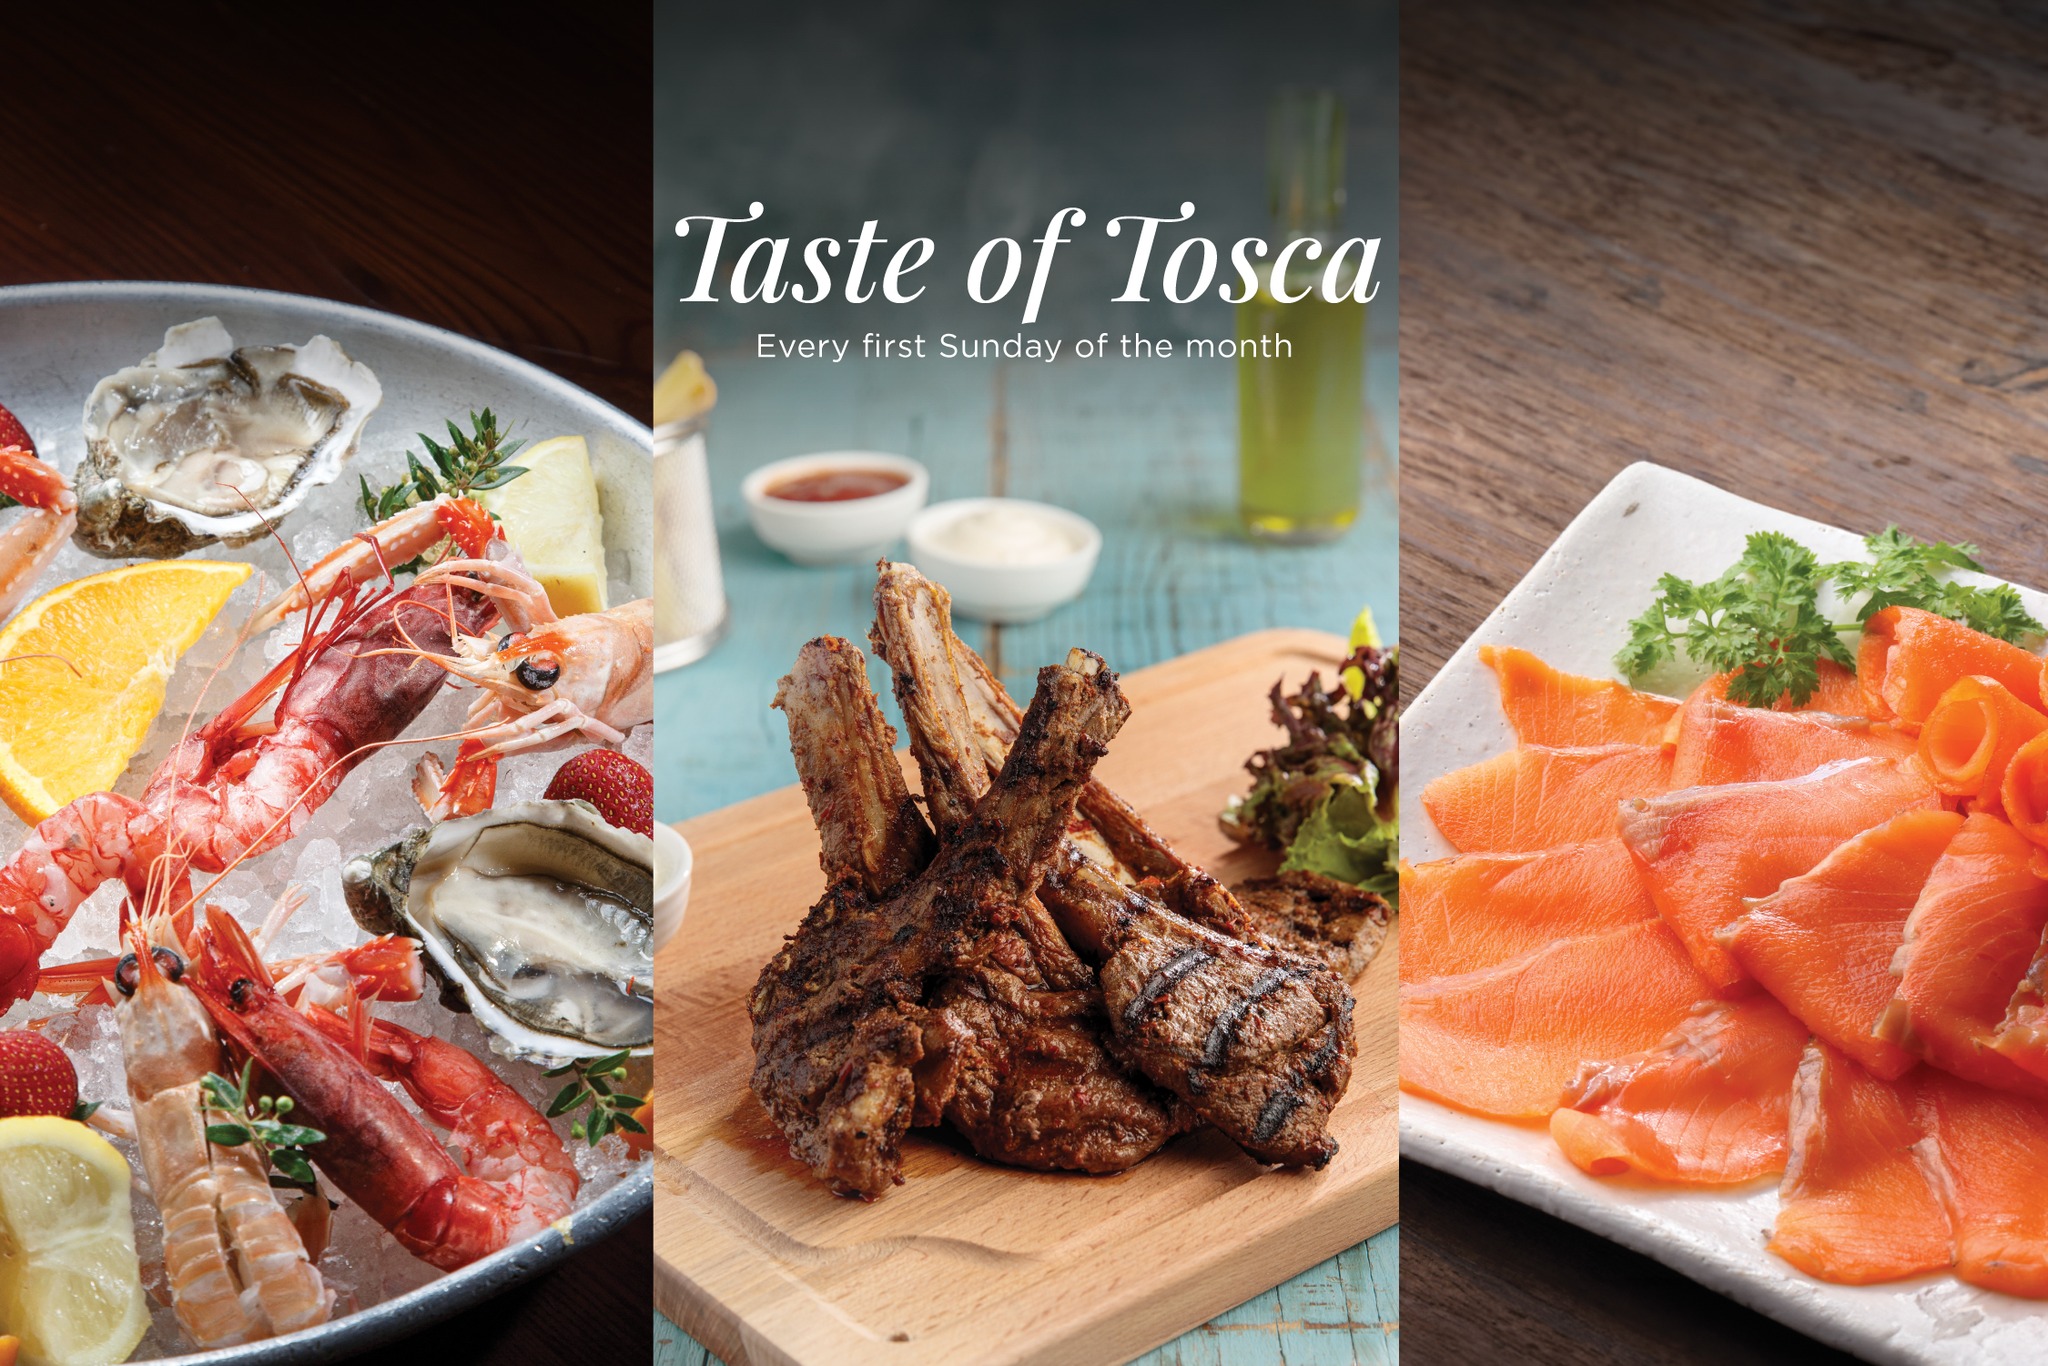 Tosca at DoubleTree by Hilton Shah Alam